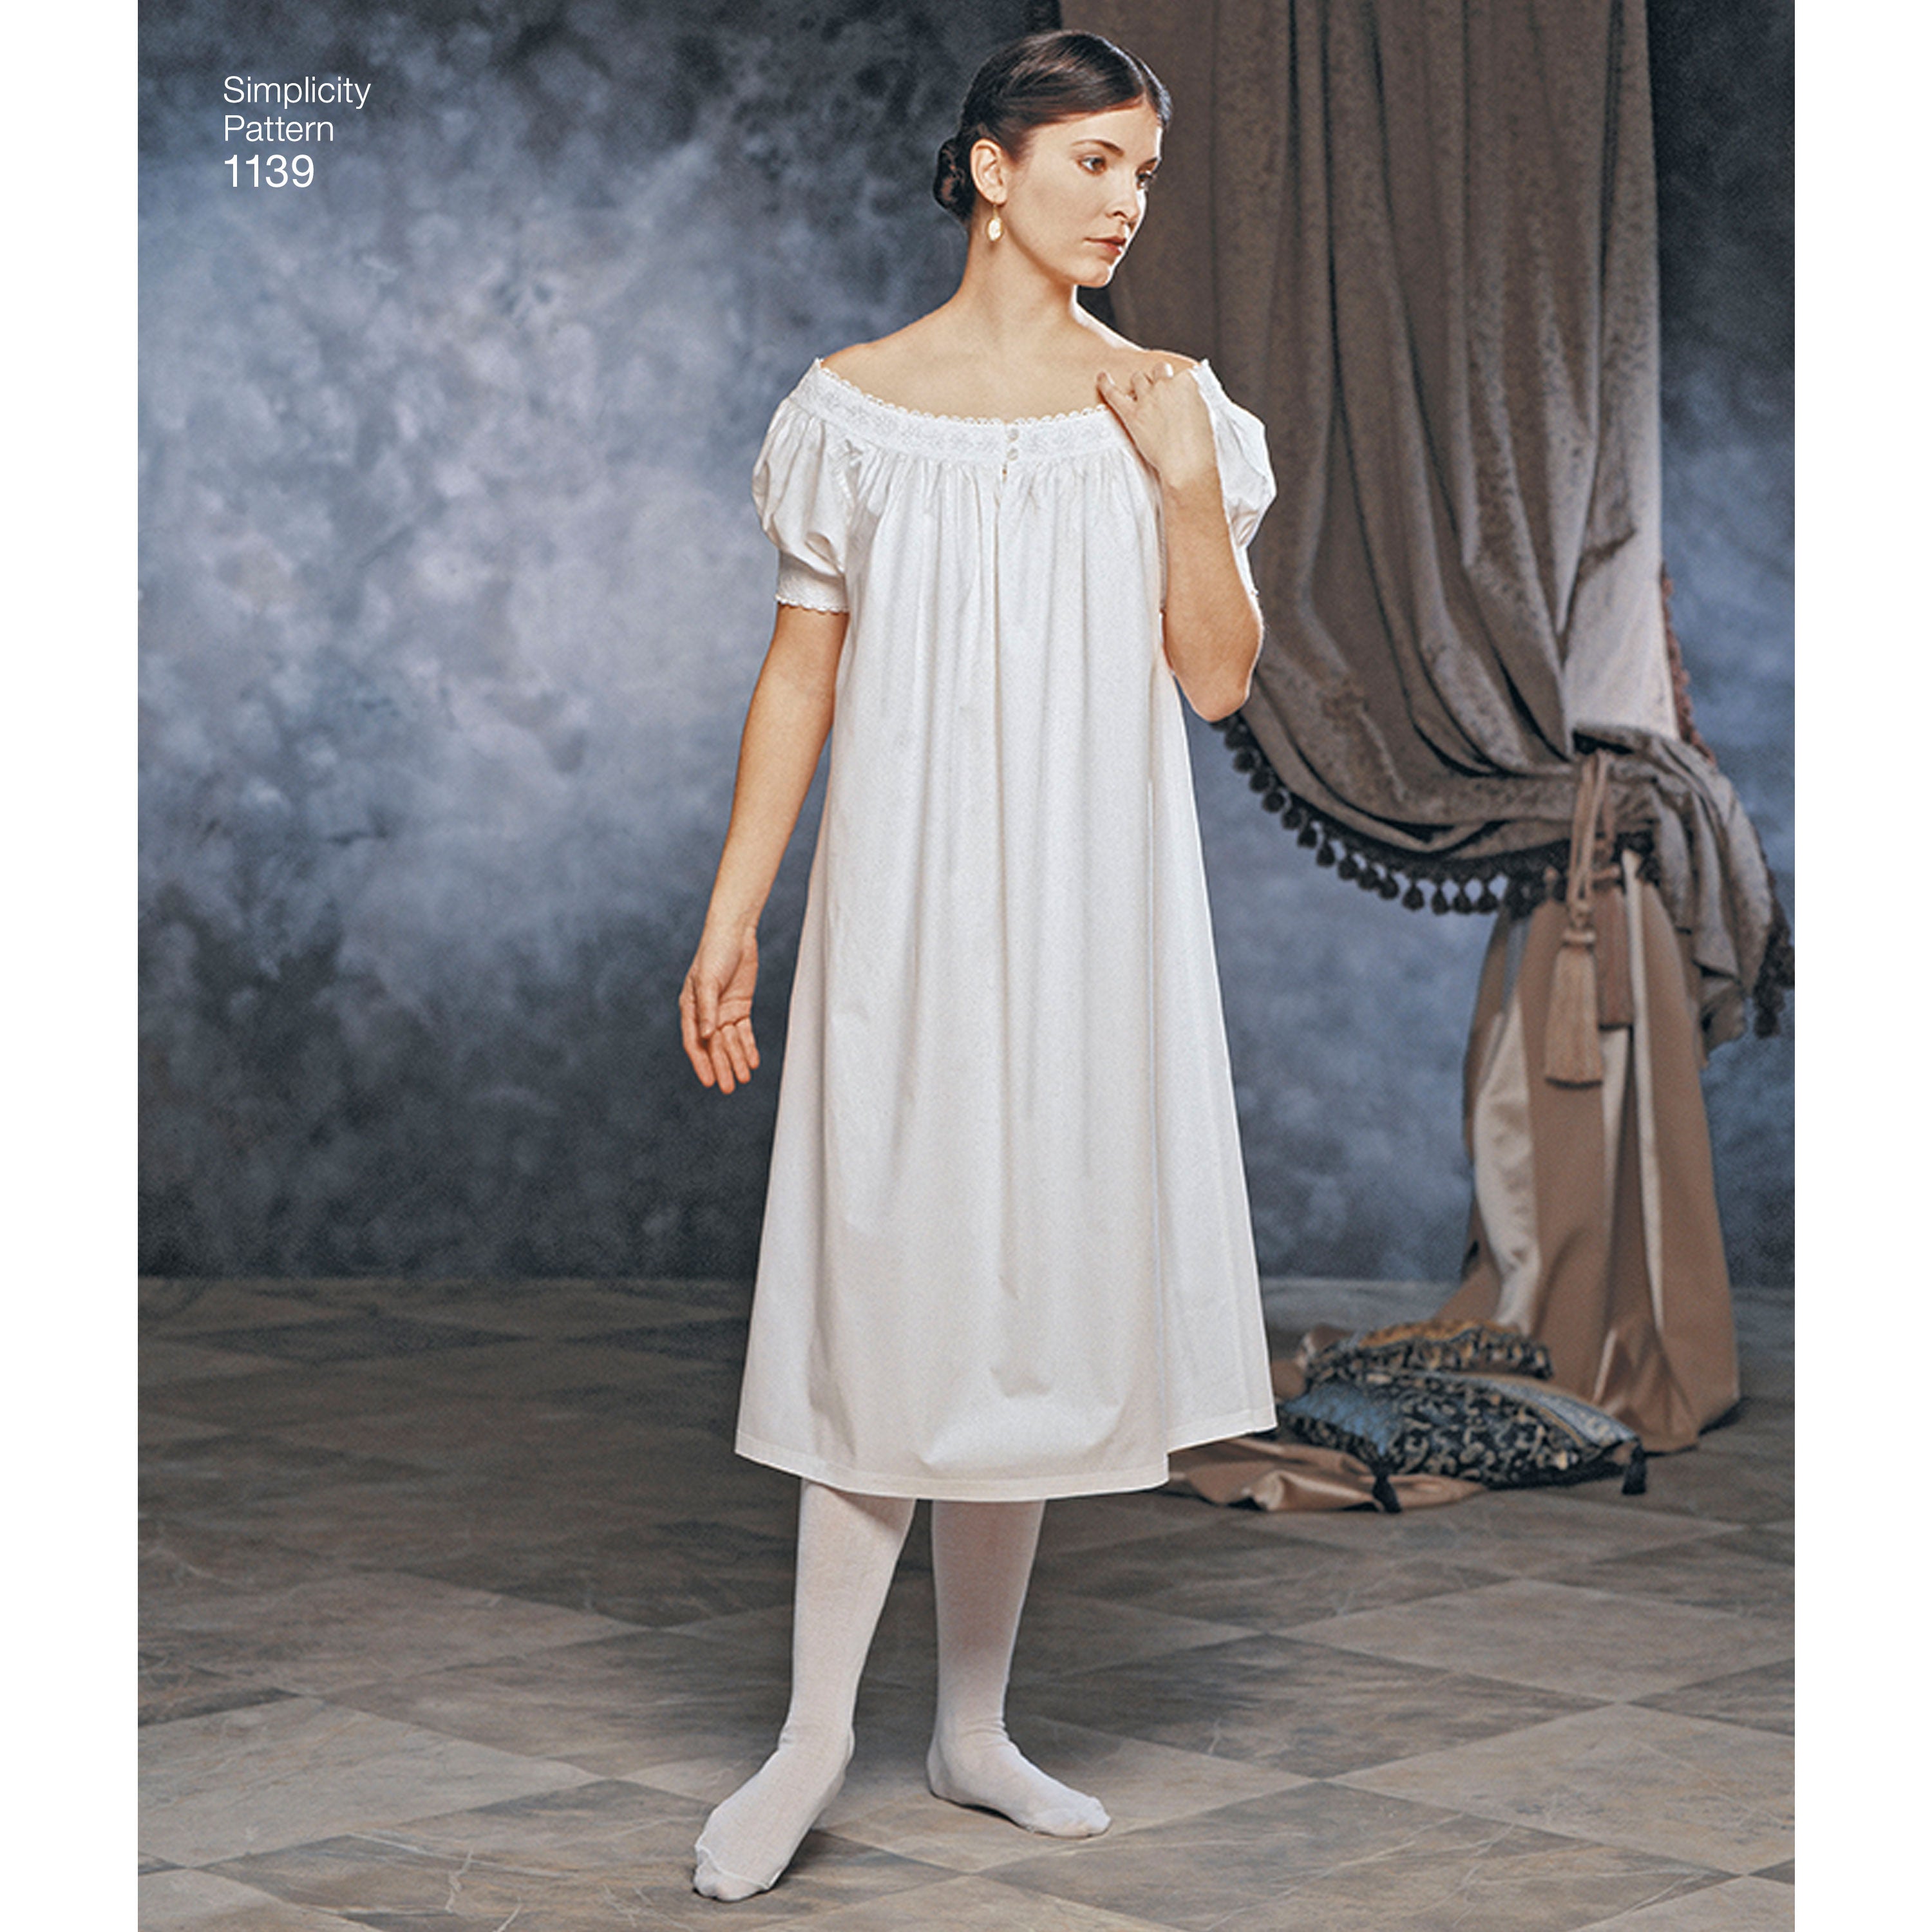 Simplicity Pattern 1139 Misses' Civil War Undergarments from Jaycotts Sewing Supplies